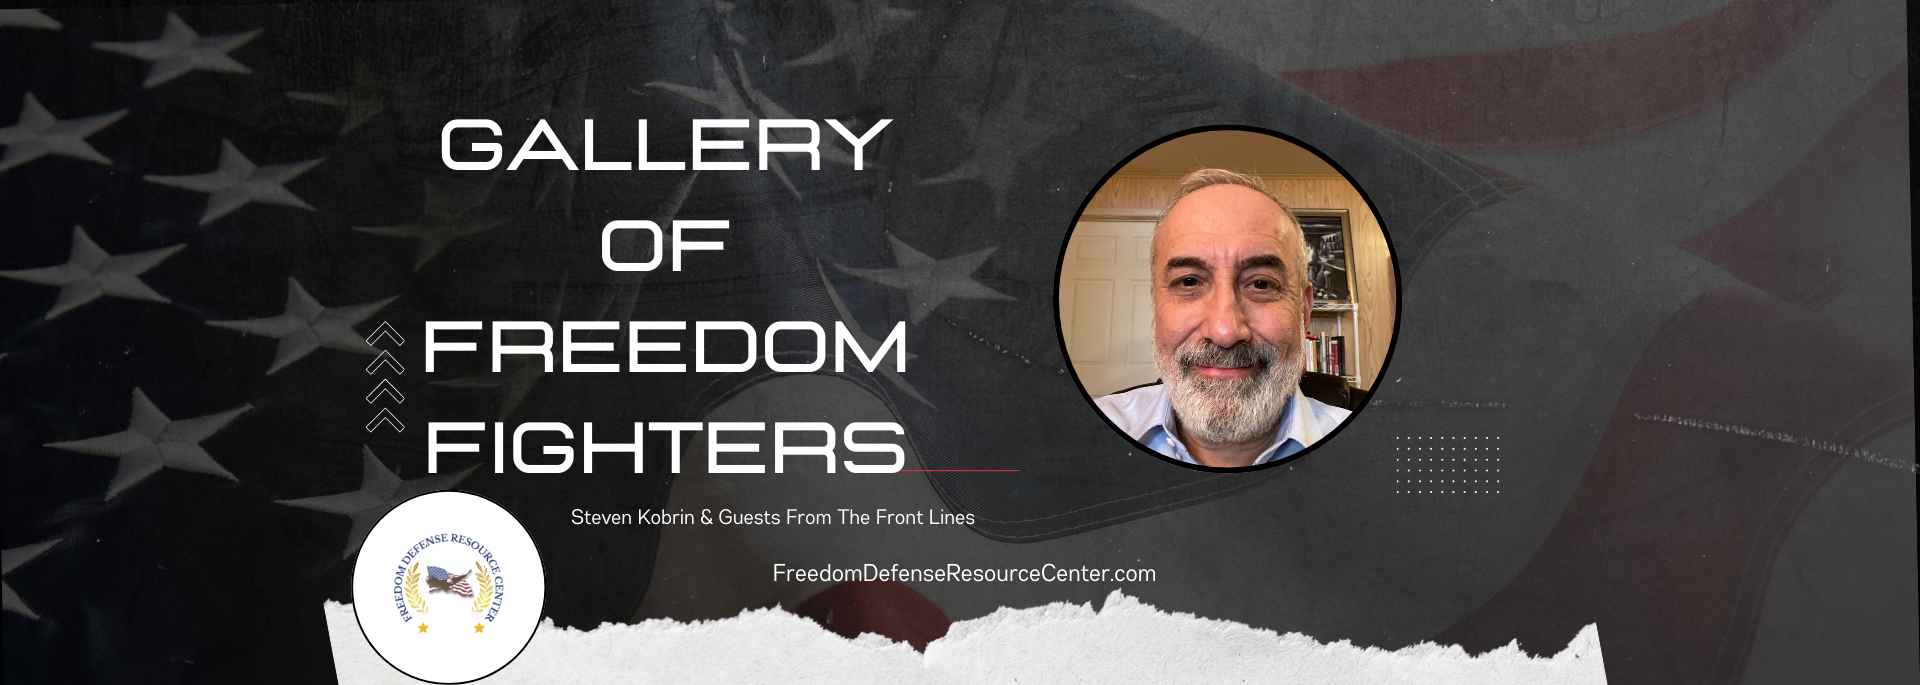 Gallery of Freedom Fighters